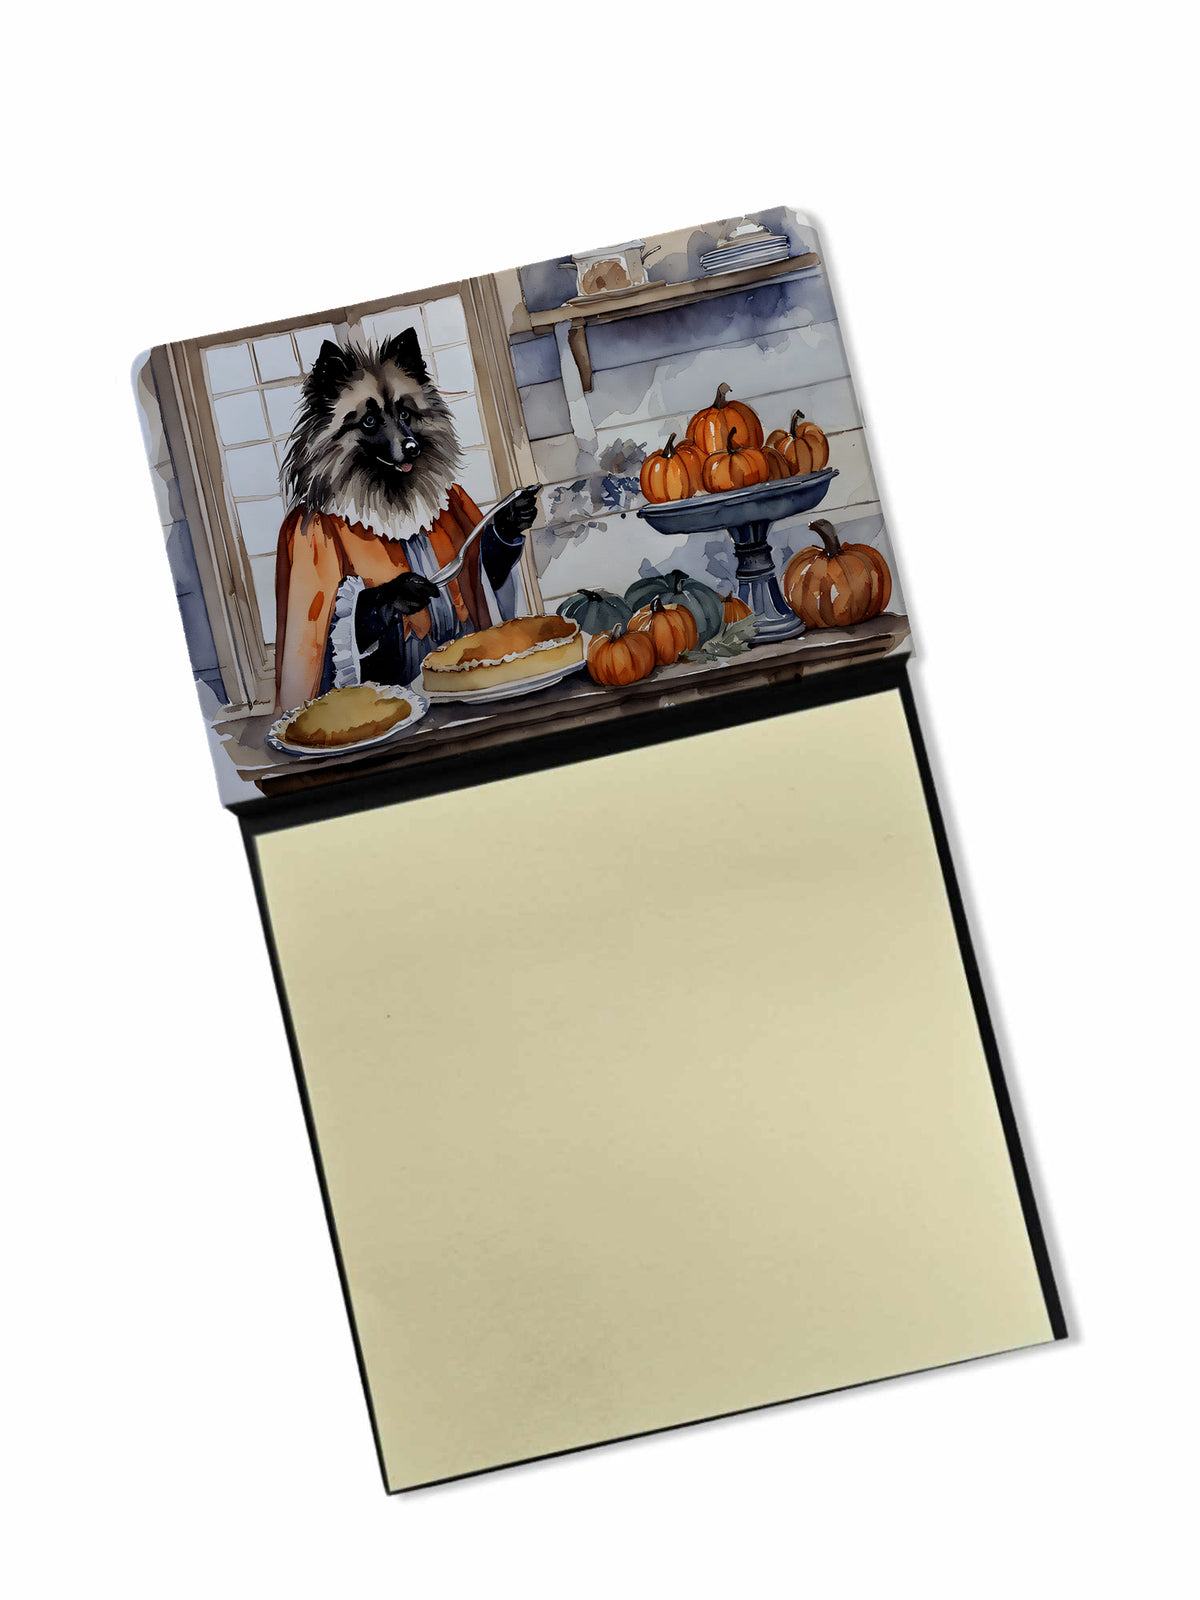 Buy this Keeshond Fall Kitchen Pumpkins Sticky Note Holder